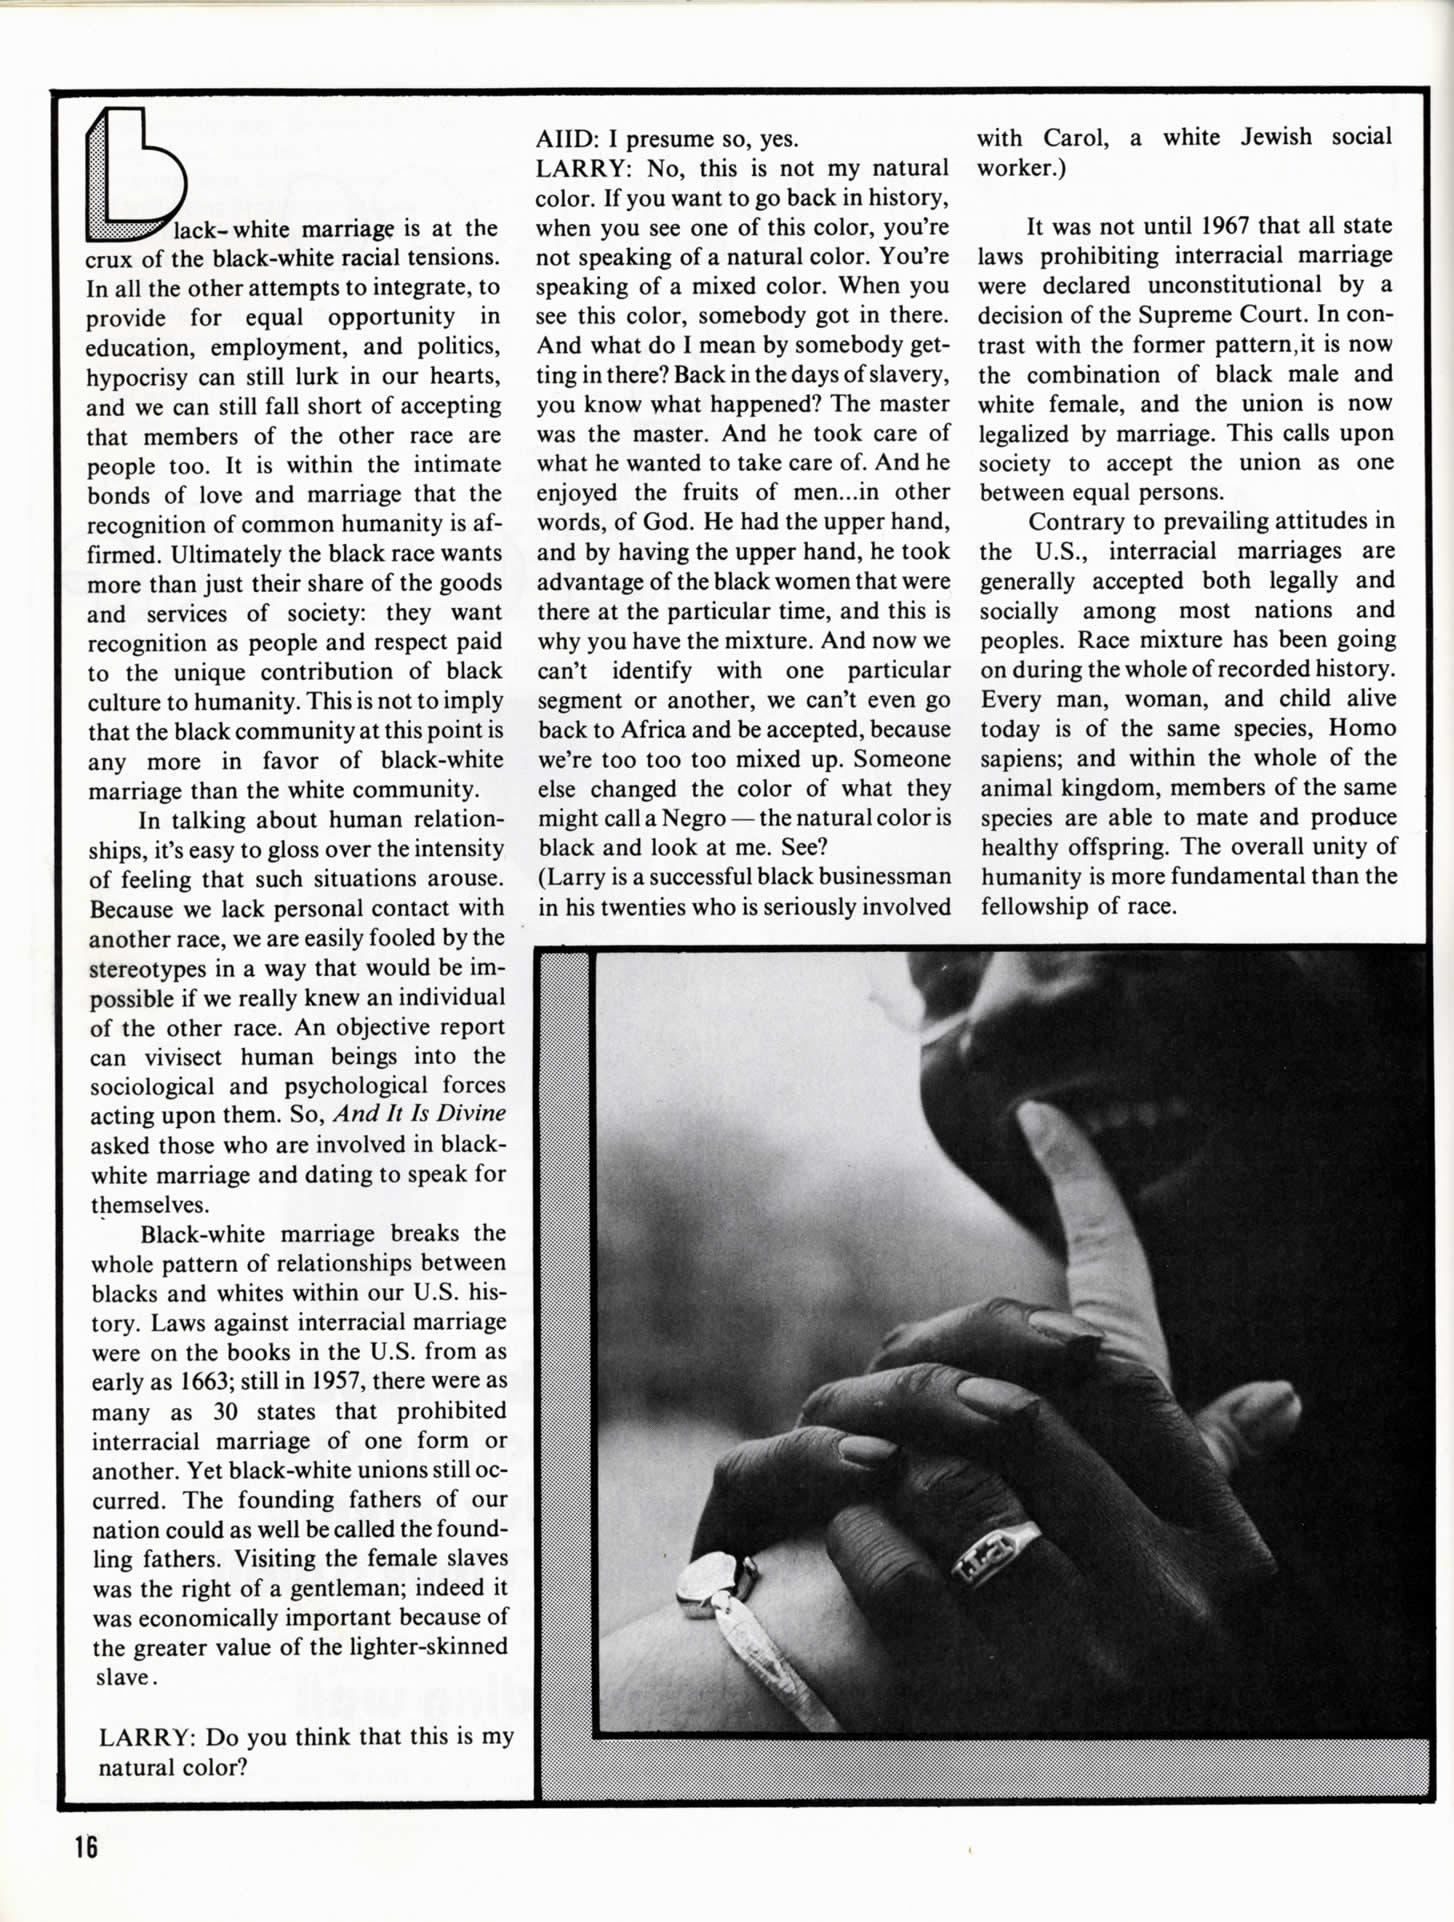 page16_Marriage_article_cont.jpg 378.2K